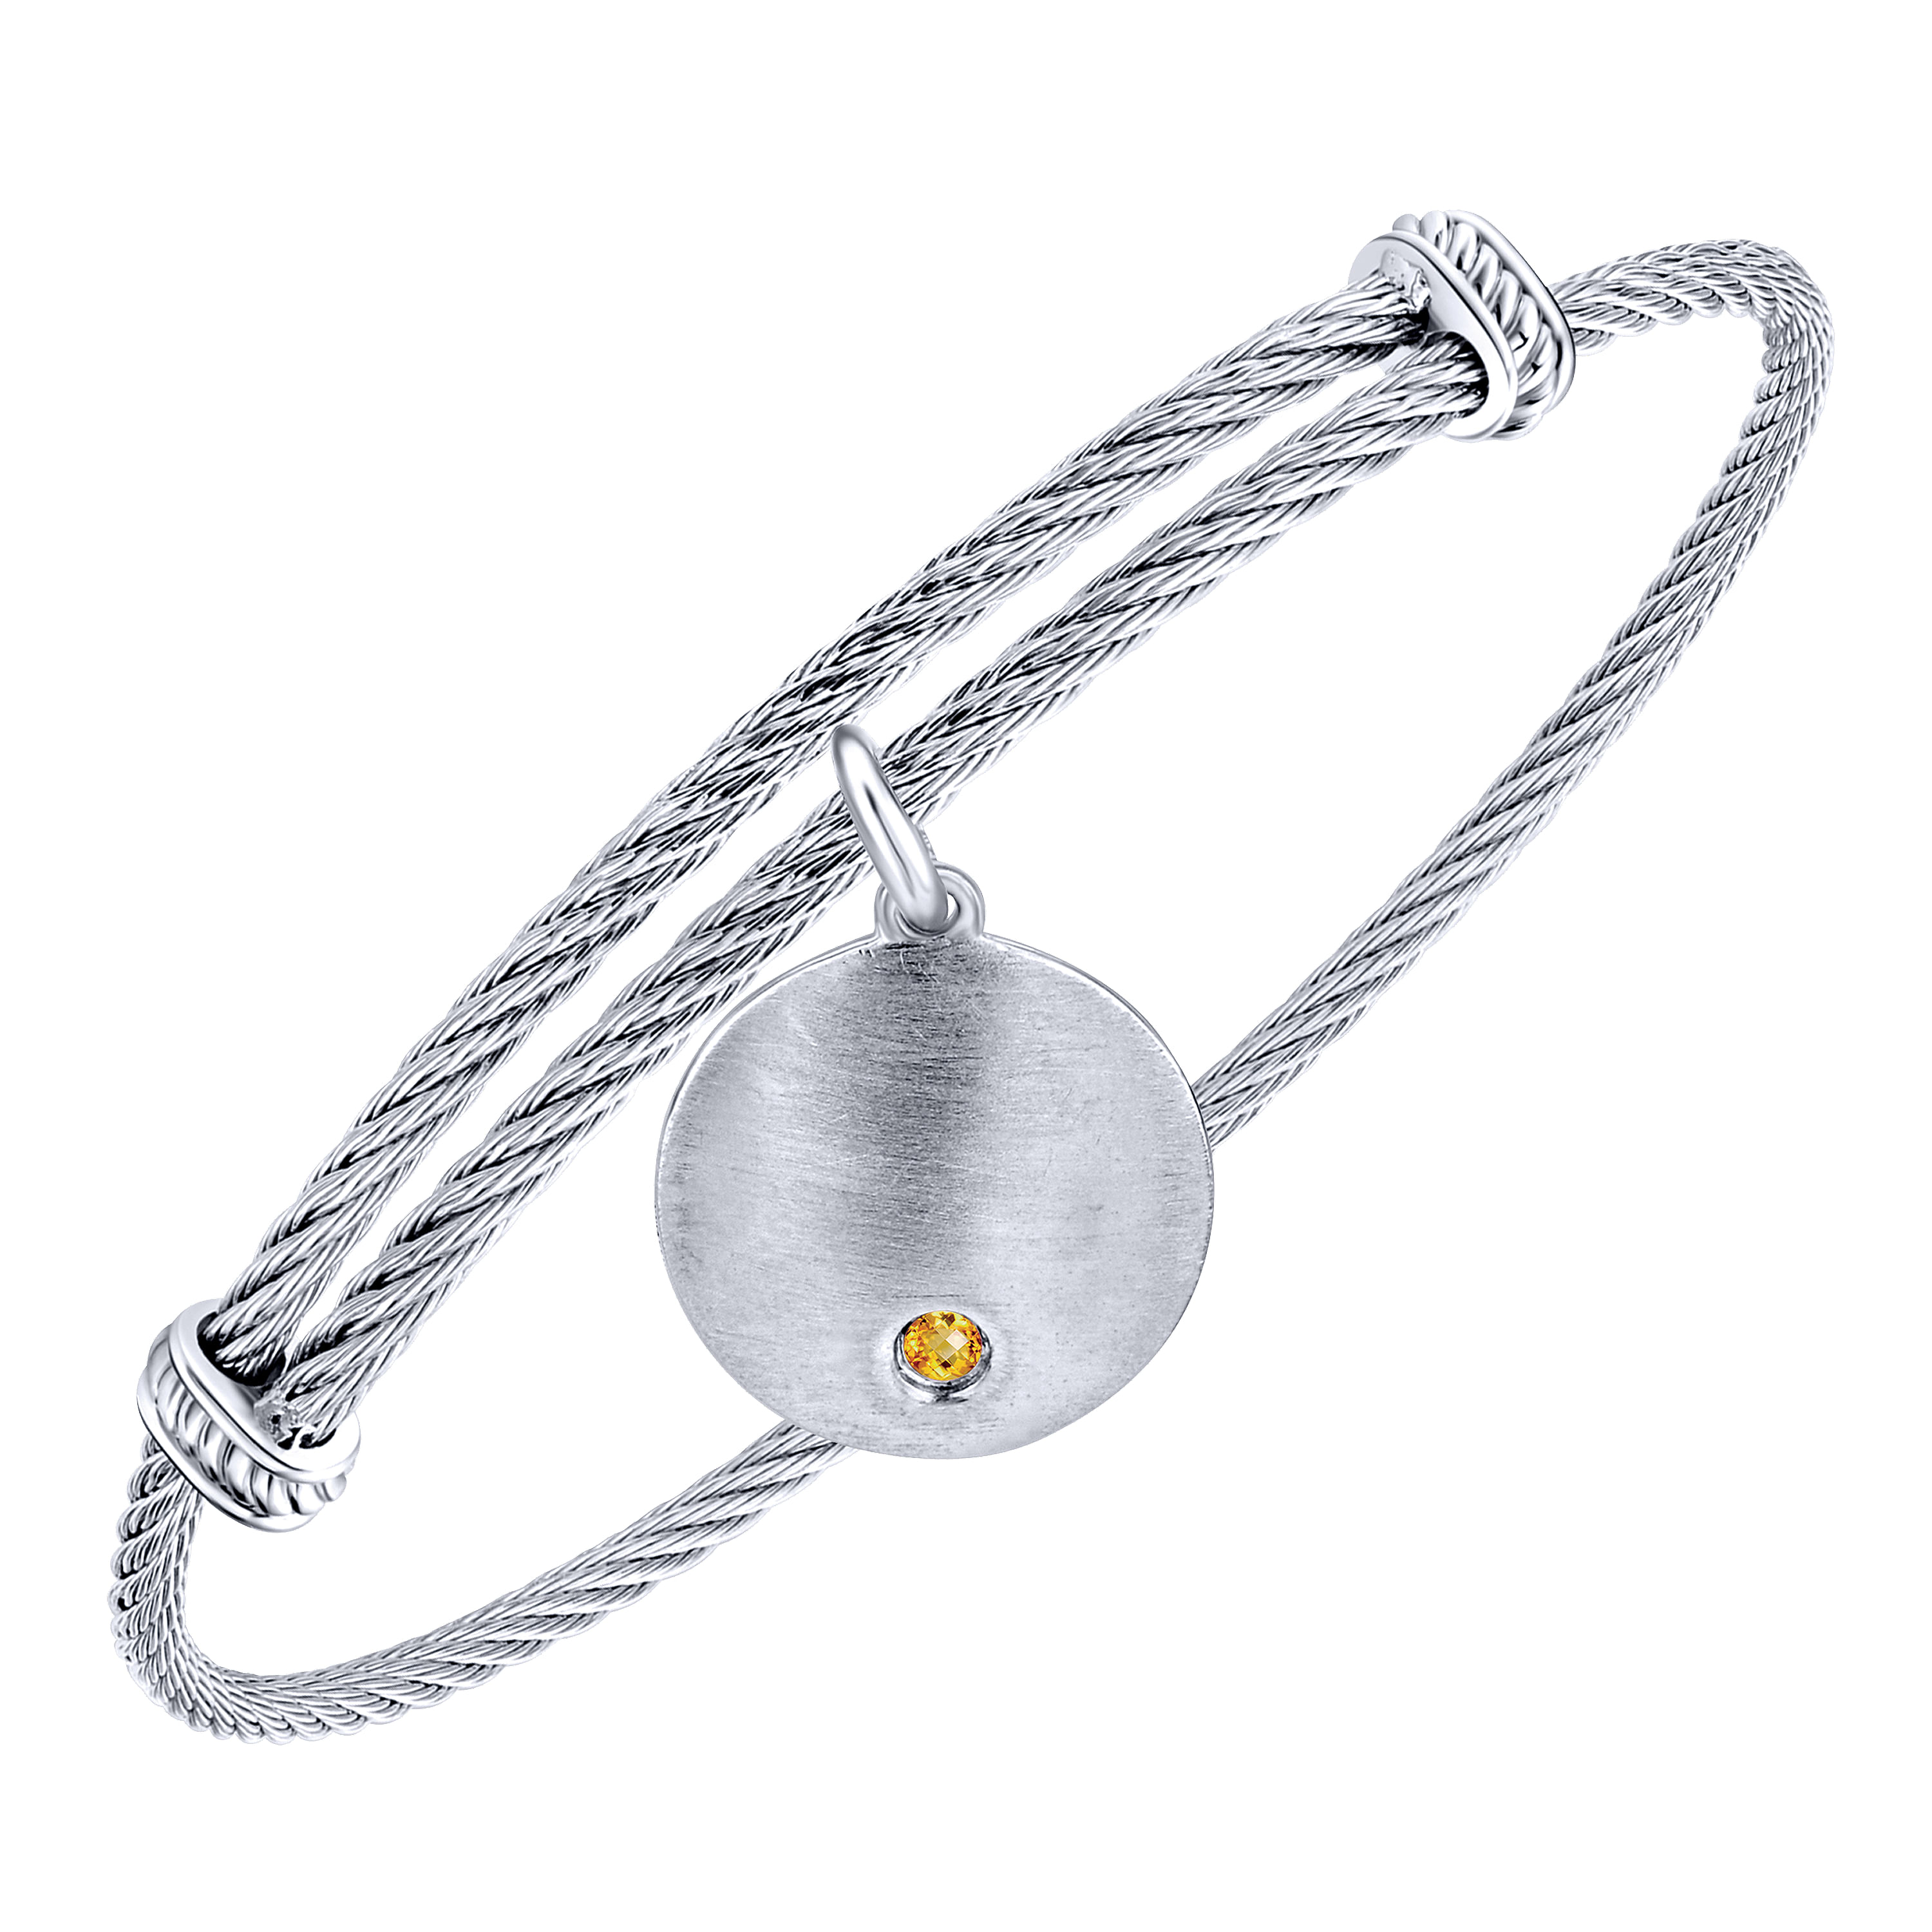 Adjustable Stainless Steel Bangle with Round Sterling Silver Citrine Stone Disc Charm